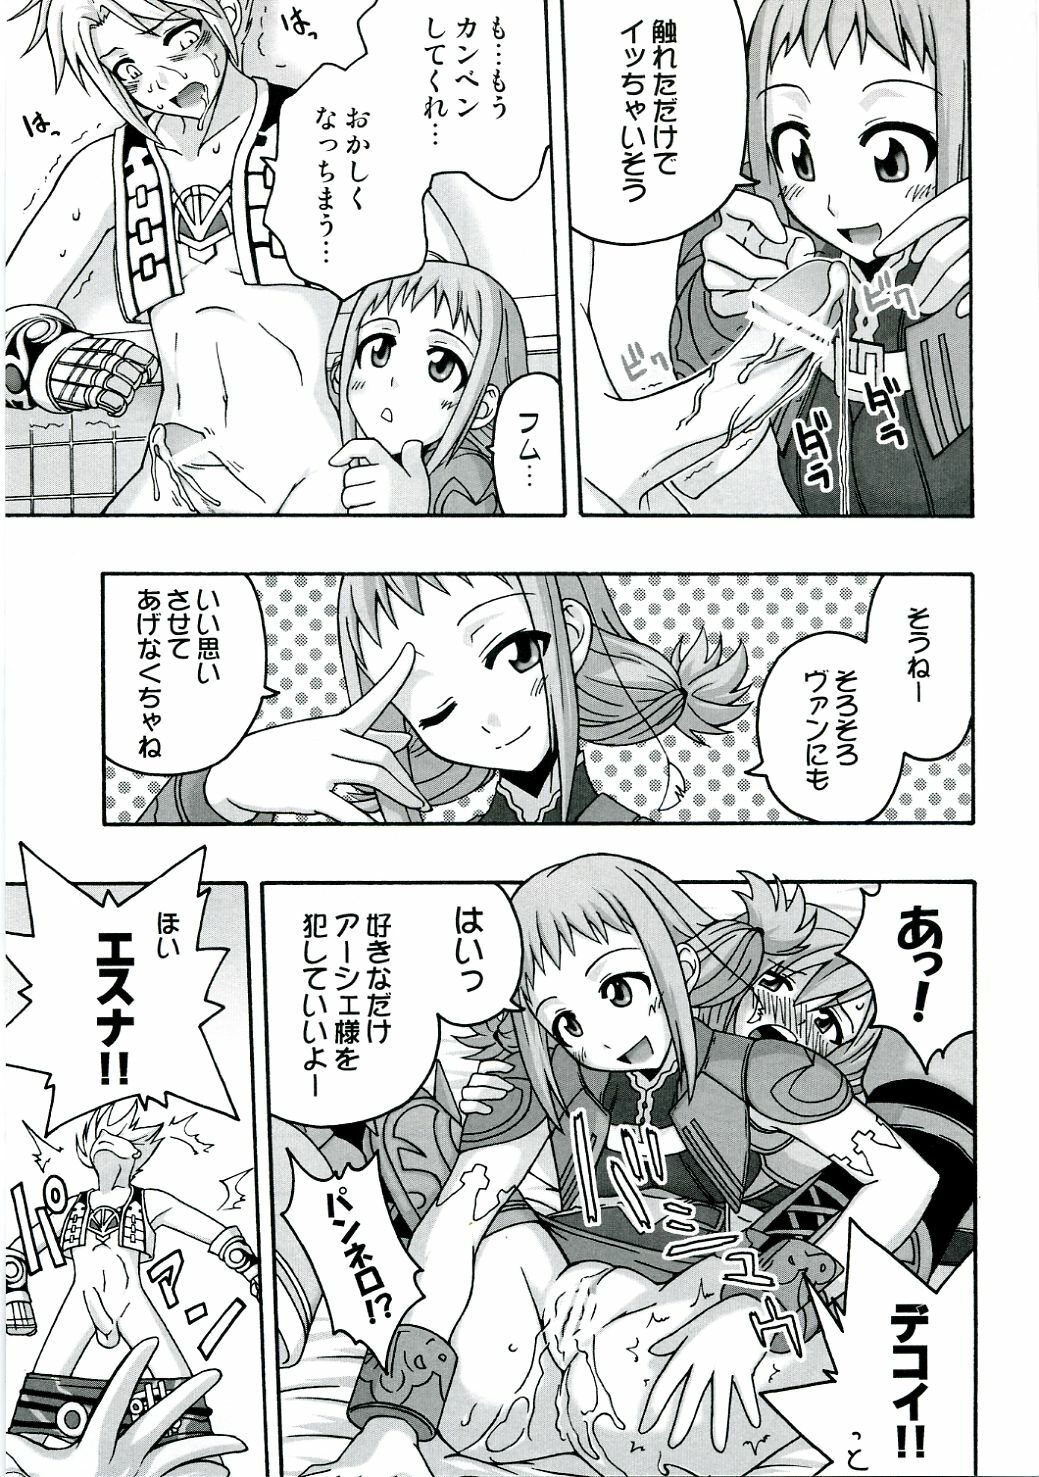 (C70) [FruitsJam (Mikagami Sou)] In The Room (Final Fantasy XII) page 16 full